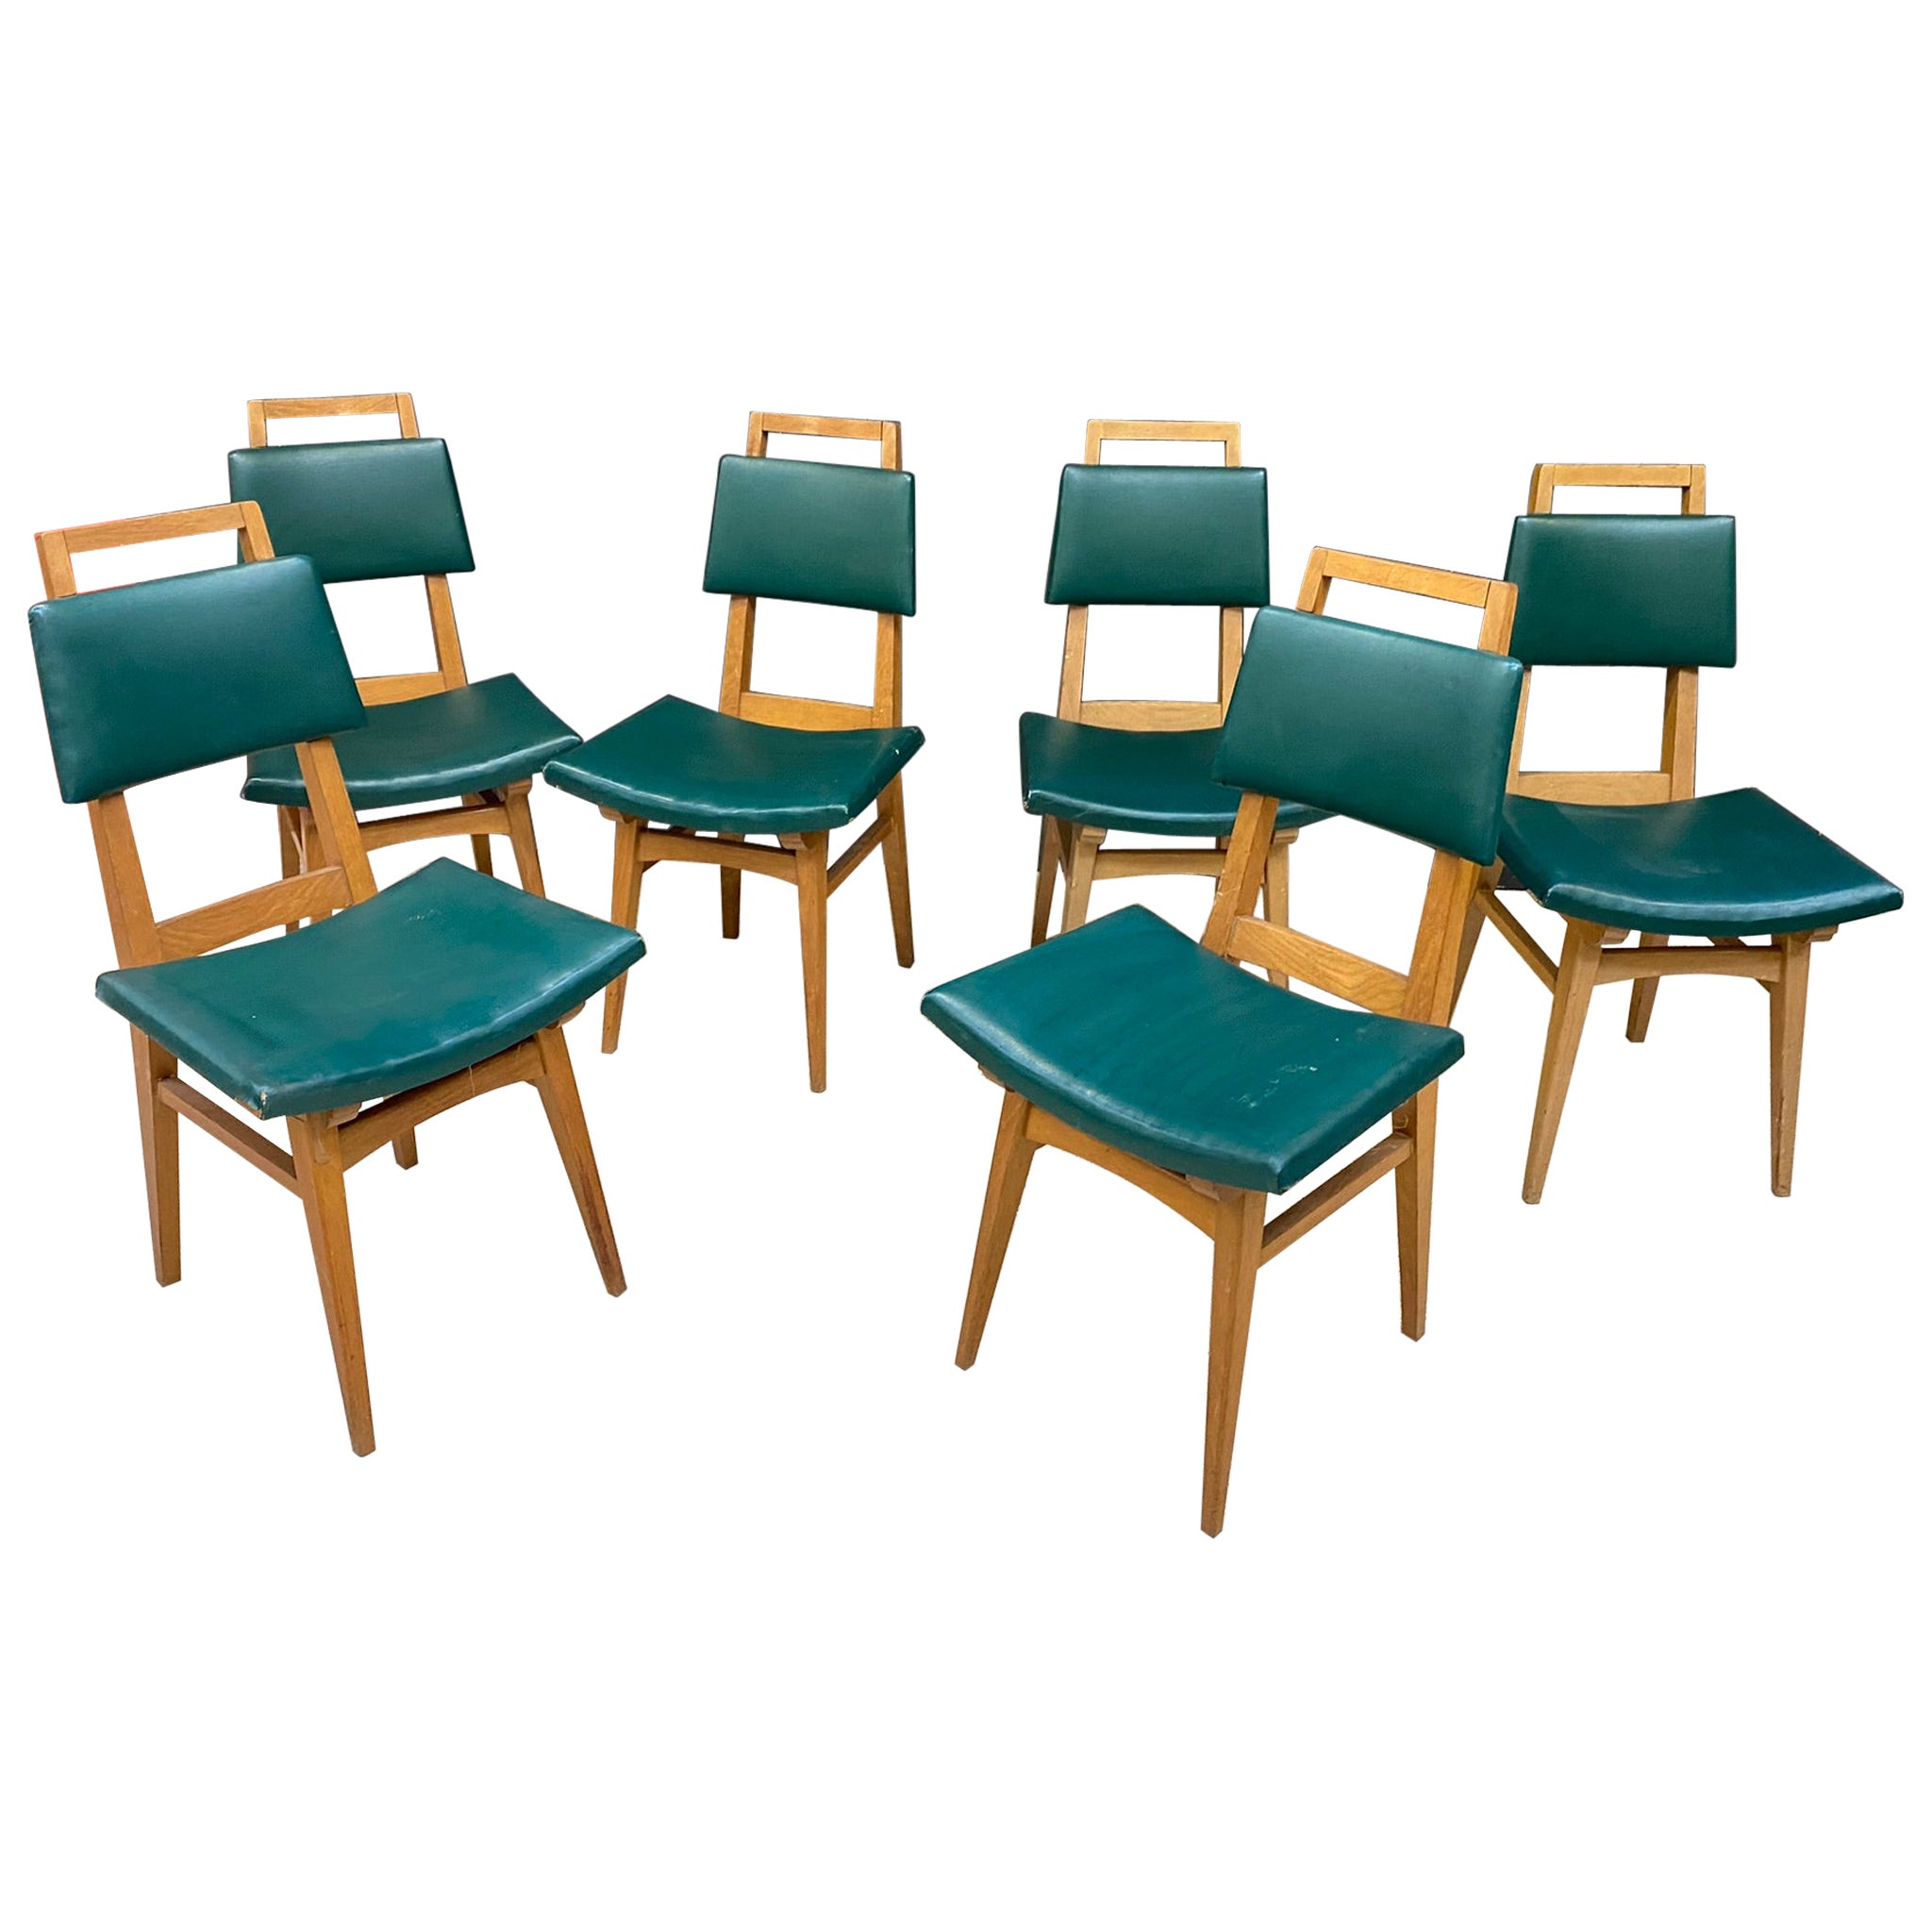 Suite of 6 Oak Chairs, France circa 1950/1960 "Reconstruction" Style For Sale